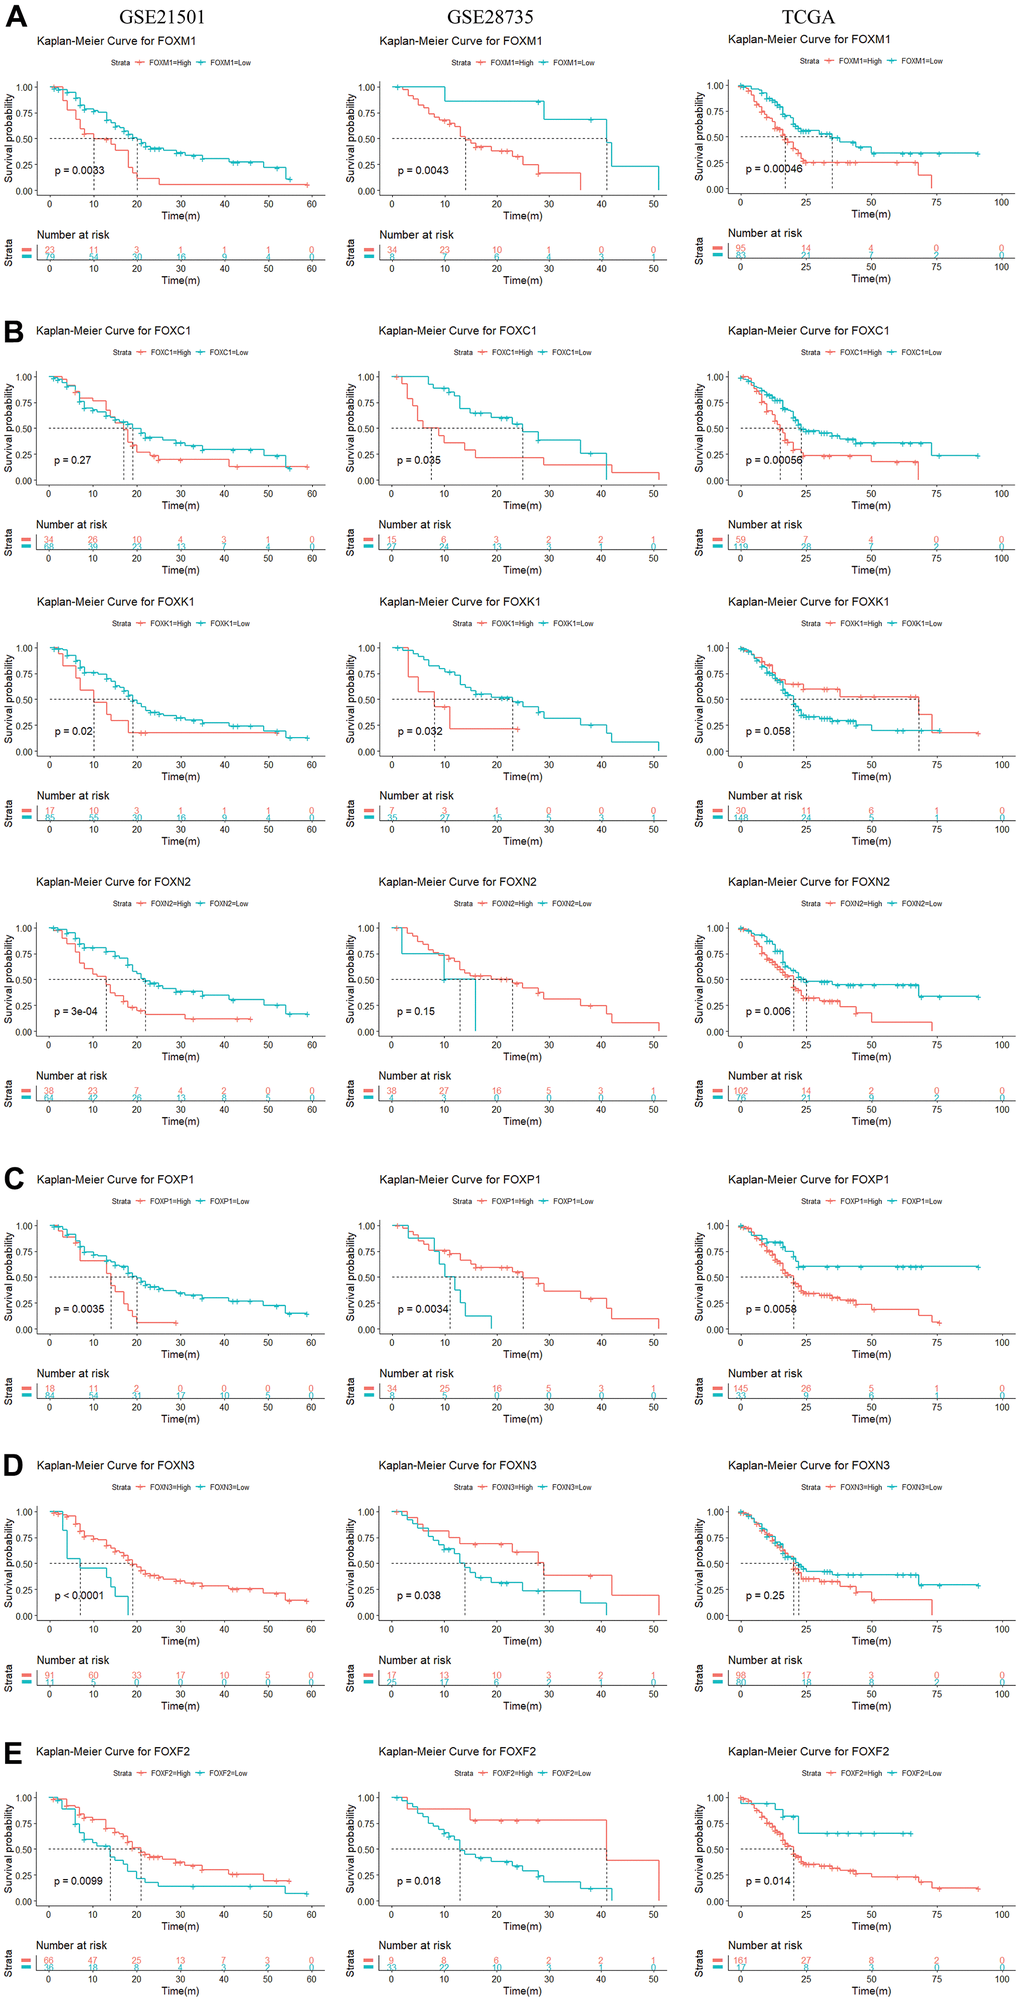 Survival analysis of 15 differentially expressed FOXs in PAAD patients (GSE21501, GSE28735, and TCGA). (A) High expression of FOXM1 was correlated with short OS in all three datasets. (B) High expression of FOXC1, FOXK1, and FOXN2 was negatively correlated with OS in two of three data sets. (C) High levels of FOXP1 were related to short OS in the TCGA and GSE21051 databases, but long disease-free survival (DFS) in the GSE28735 database. (D) Expression of FOXN3 was positively correlated with OS in the GSE28735 and GSE21051 databases, but showed no significant relationship in the TCGA database. (E) Expression of FOXF2 was positively correlated with OS in the GSE28735 and GSE21051 databases but was negatively related to OS in the TCGA database.